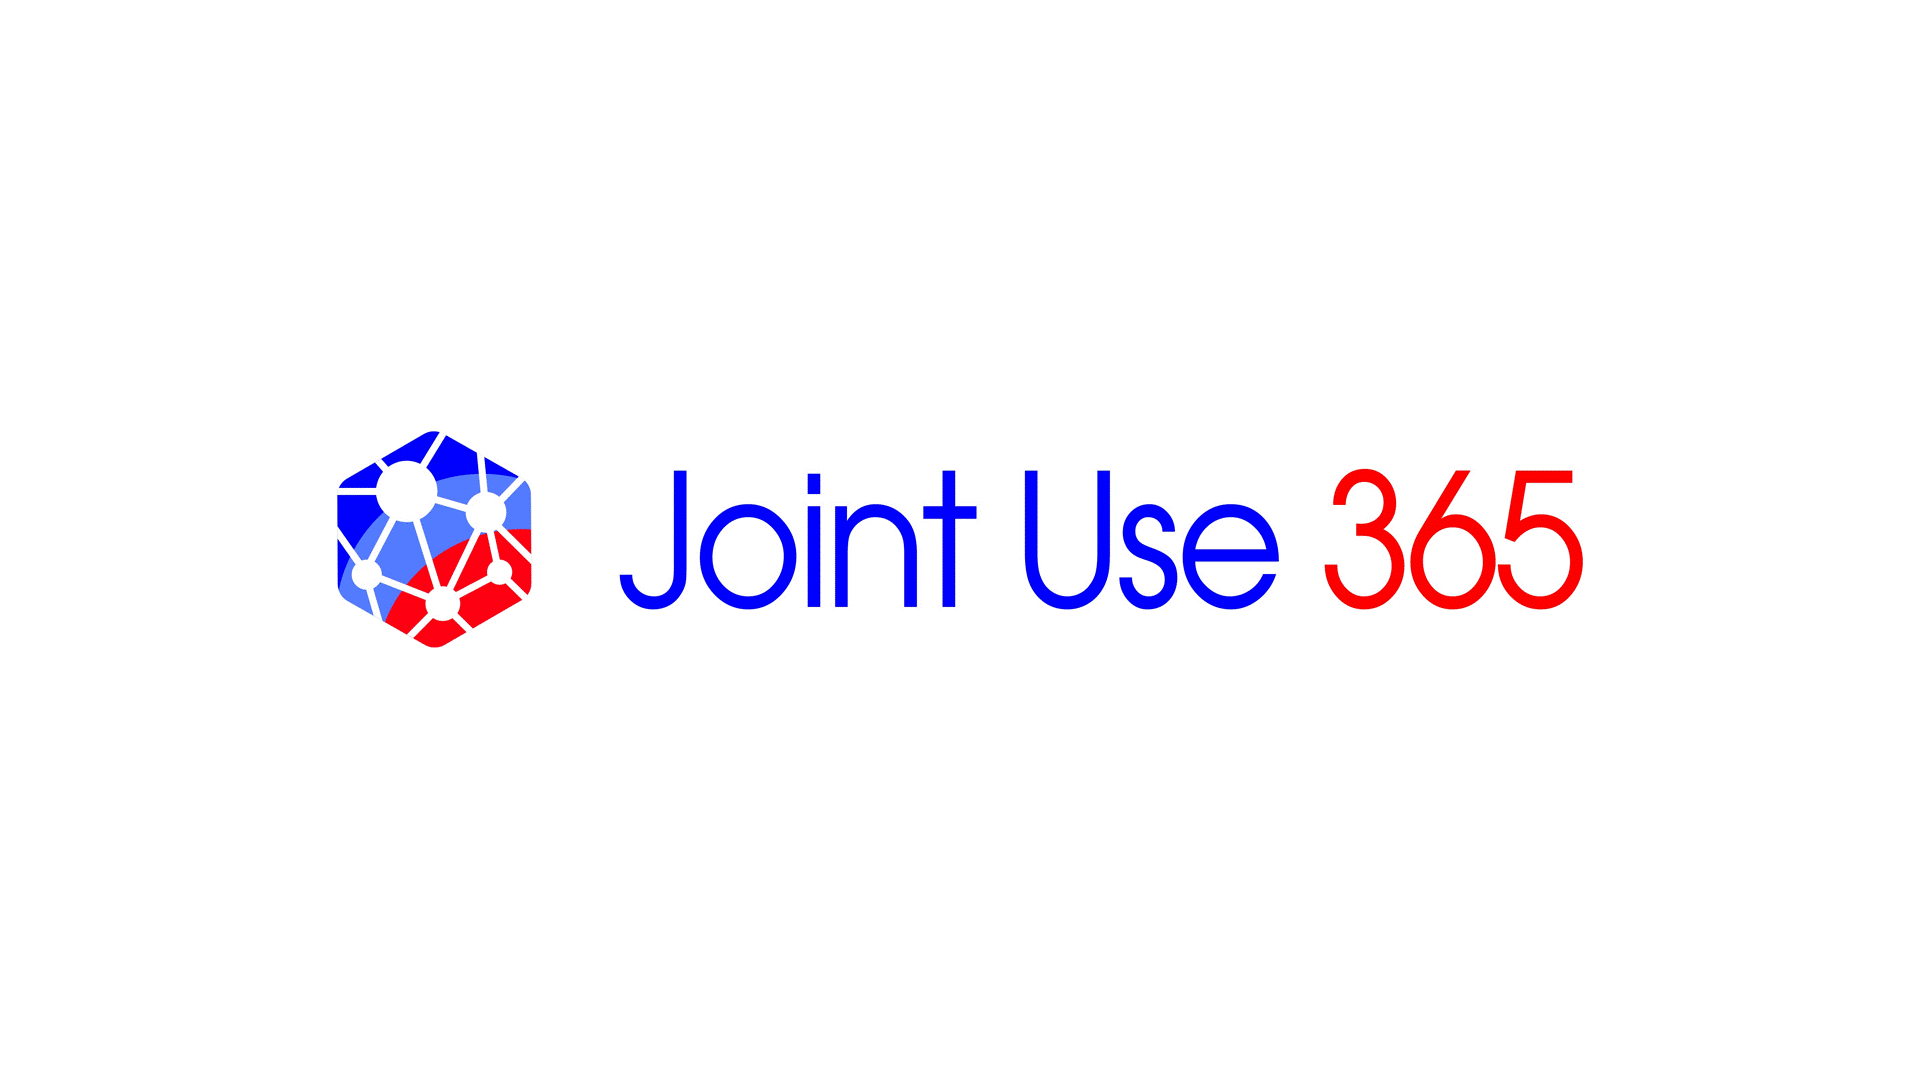 Joint Use 365, the new look